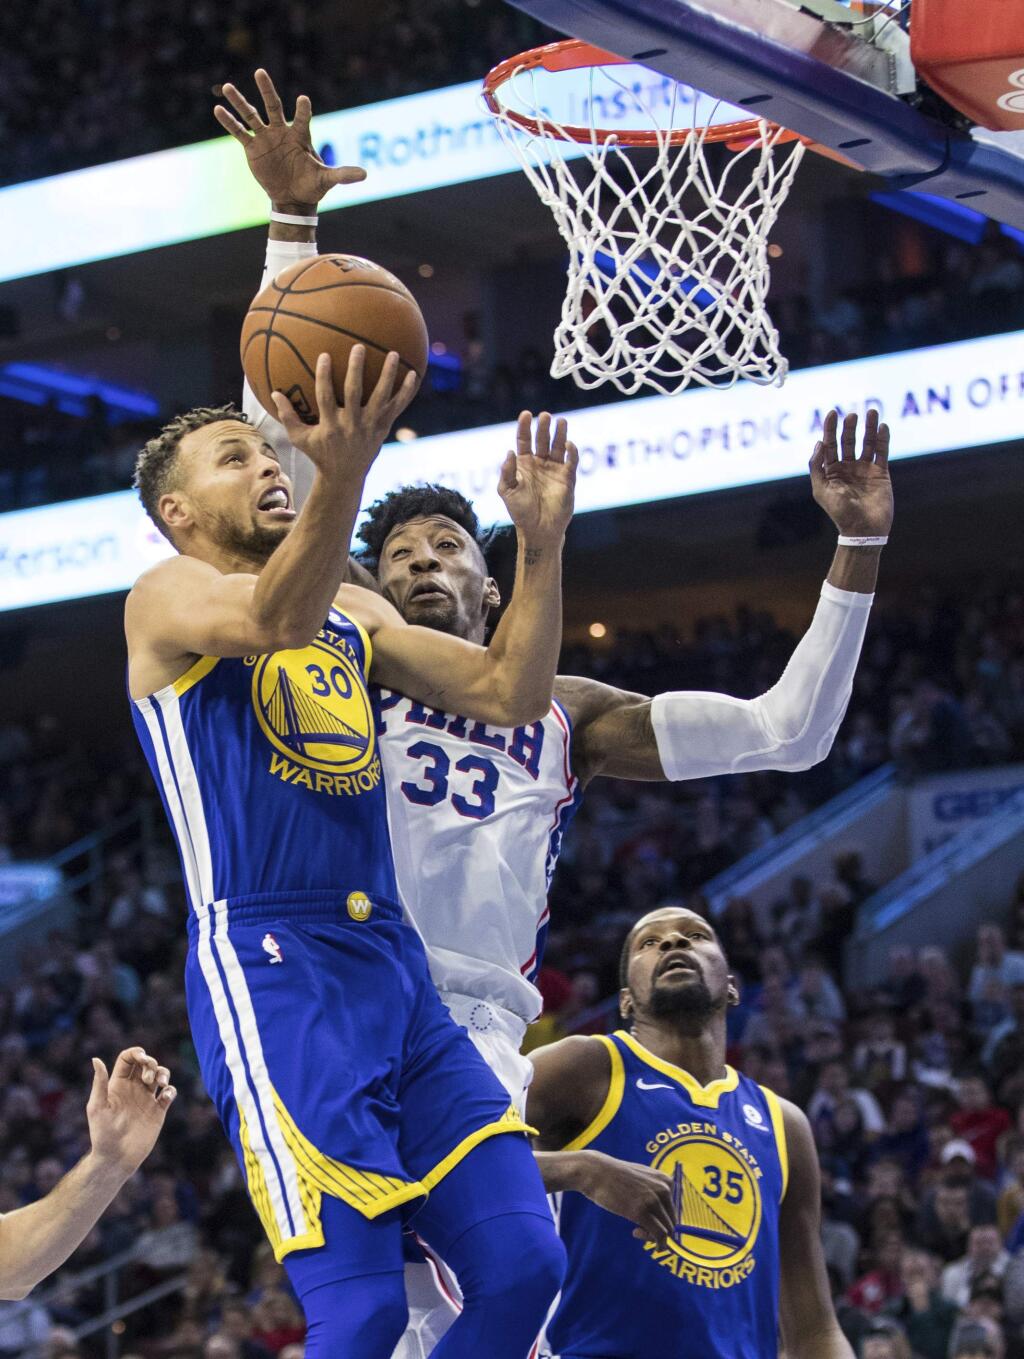 Golden State Warriors' Stephen Curry, left, goes up for the shot with Philadelphia 76ers' Robert Covington, right, defending during the first half of an NBA basketball game Saturday, Nov. 18, 2017, in Philadelphia. (AP Photo/Chris Szagola)